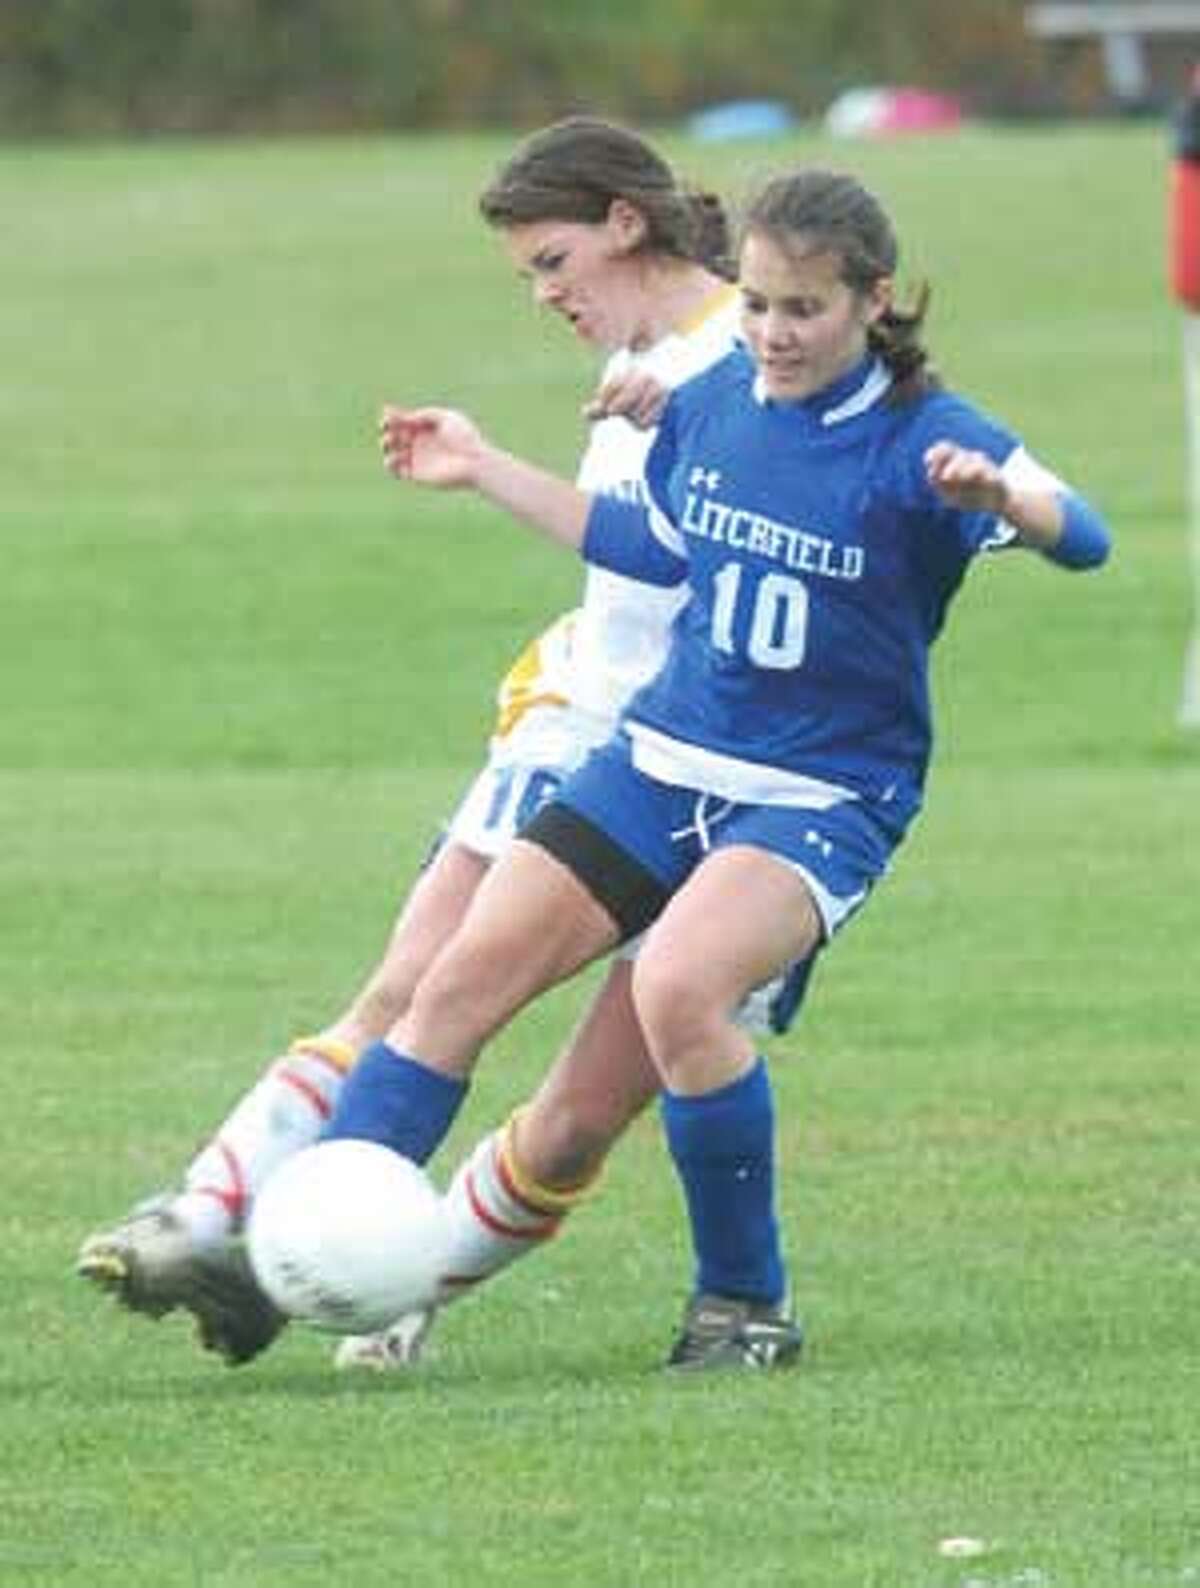 MIC NICOSIA/Register Citizen Housatonic's Katherine Eldridge, left, and Litchfield's Brittany Quinion battle for the ball during Wednesday's game in Falls Village. Purchase a glossy print of this photo and more at www.registercitizen.com.